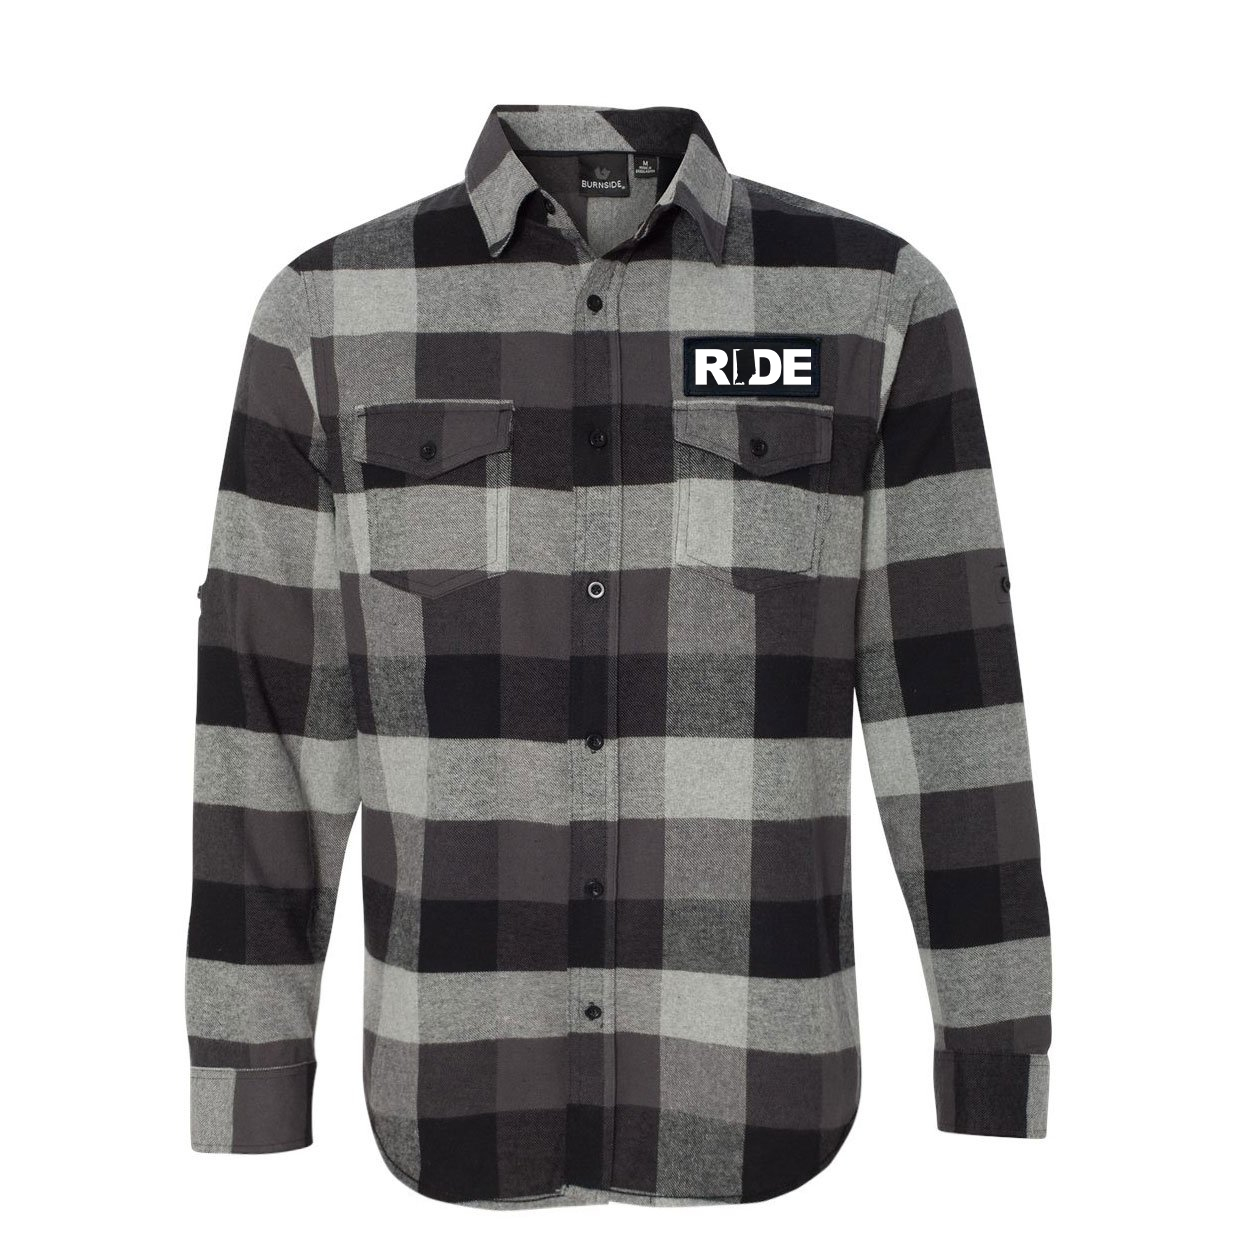 Ride Indiana Classic Unisex Long Sleeve Woven Patch Flannel Shirt Black/Gray (White Logo)